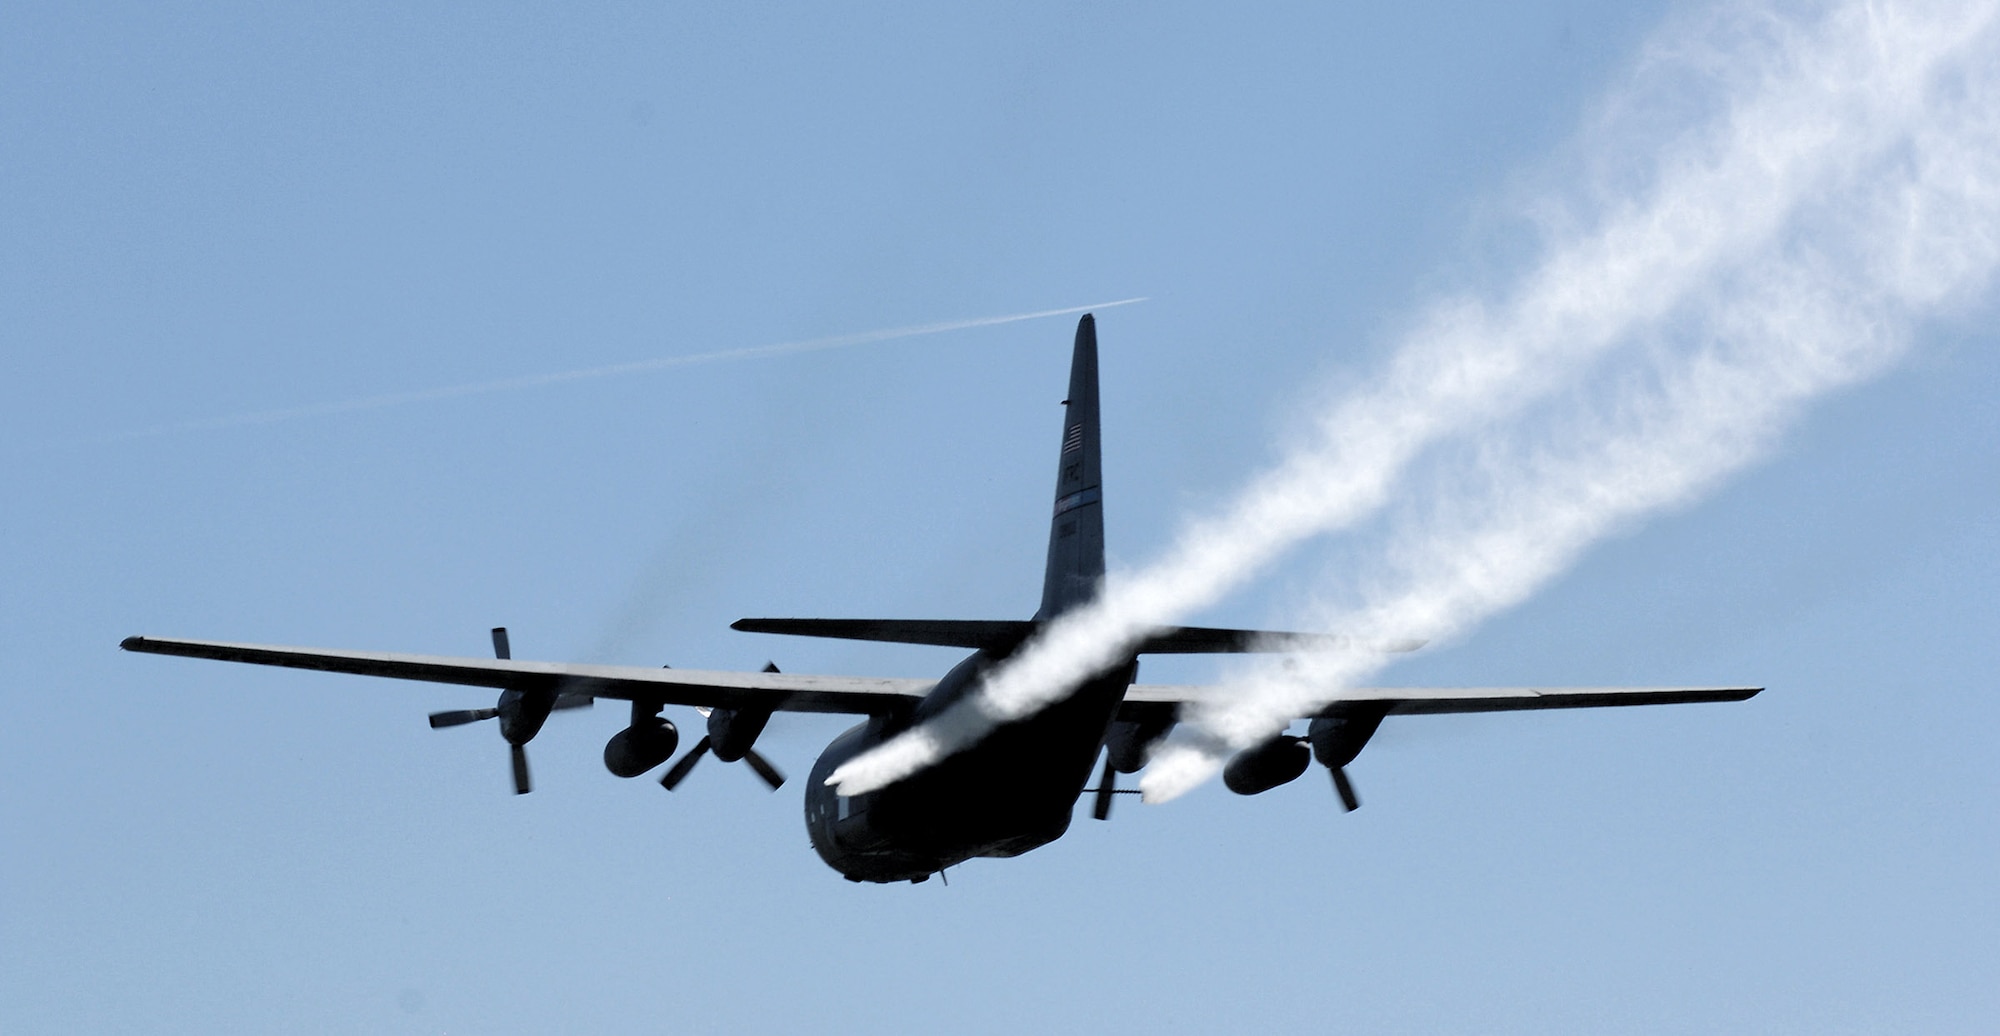 A C-130 Hercules aircraft from the 910th Airlift Wing, Youngstown Air Reserve Station, Ohio, will continue spraying mosquito pesticide over several Louisiana parishes Sept. 22 in the wake of heavy rainfall and flodding brought on by Hurricane Ike. (U.S. Air Force photo/Airman 1st Class Chad Kellum)